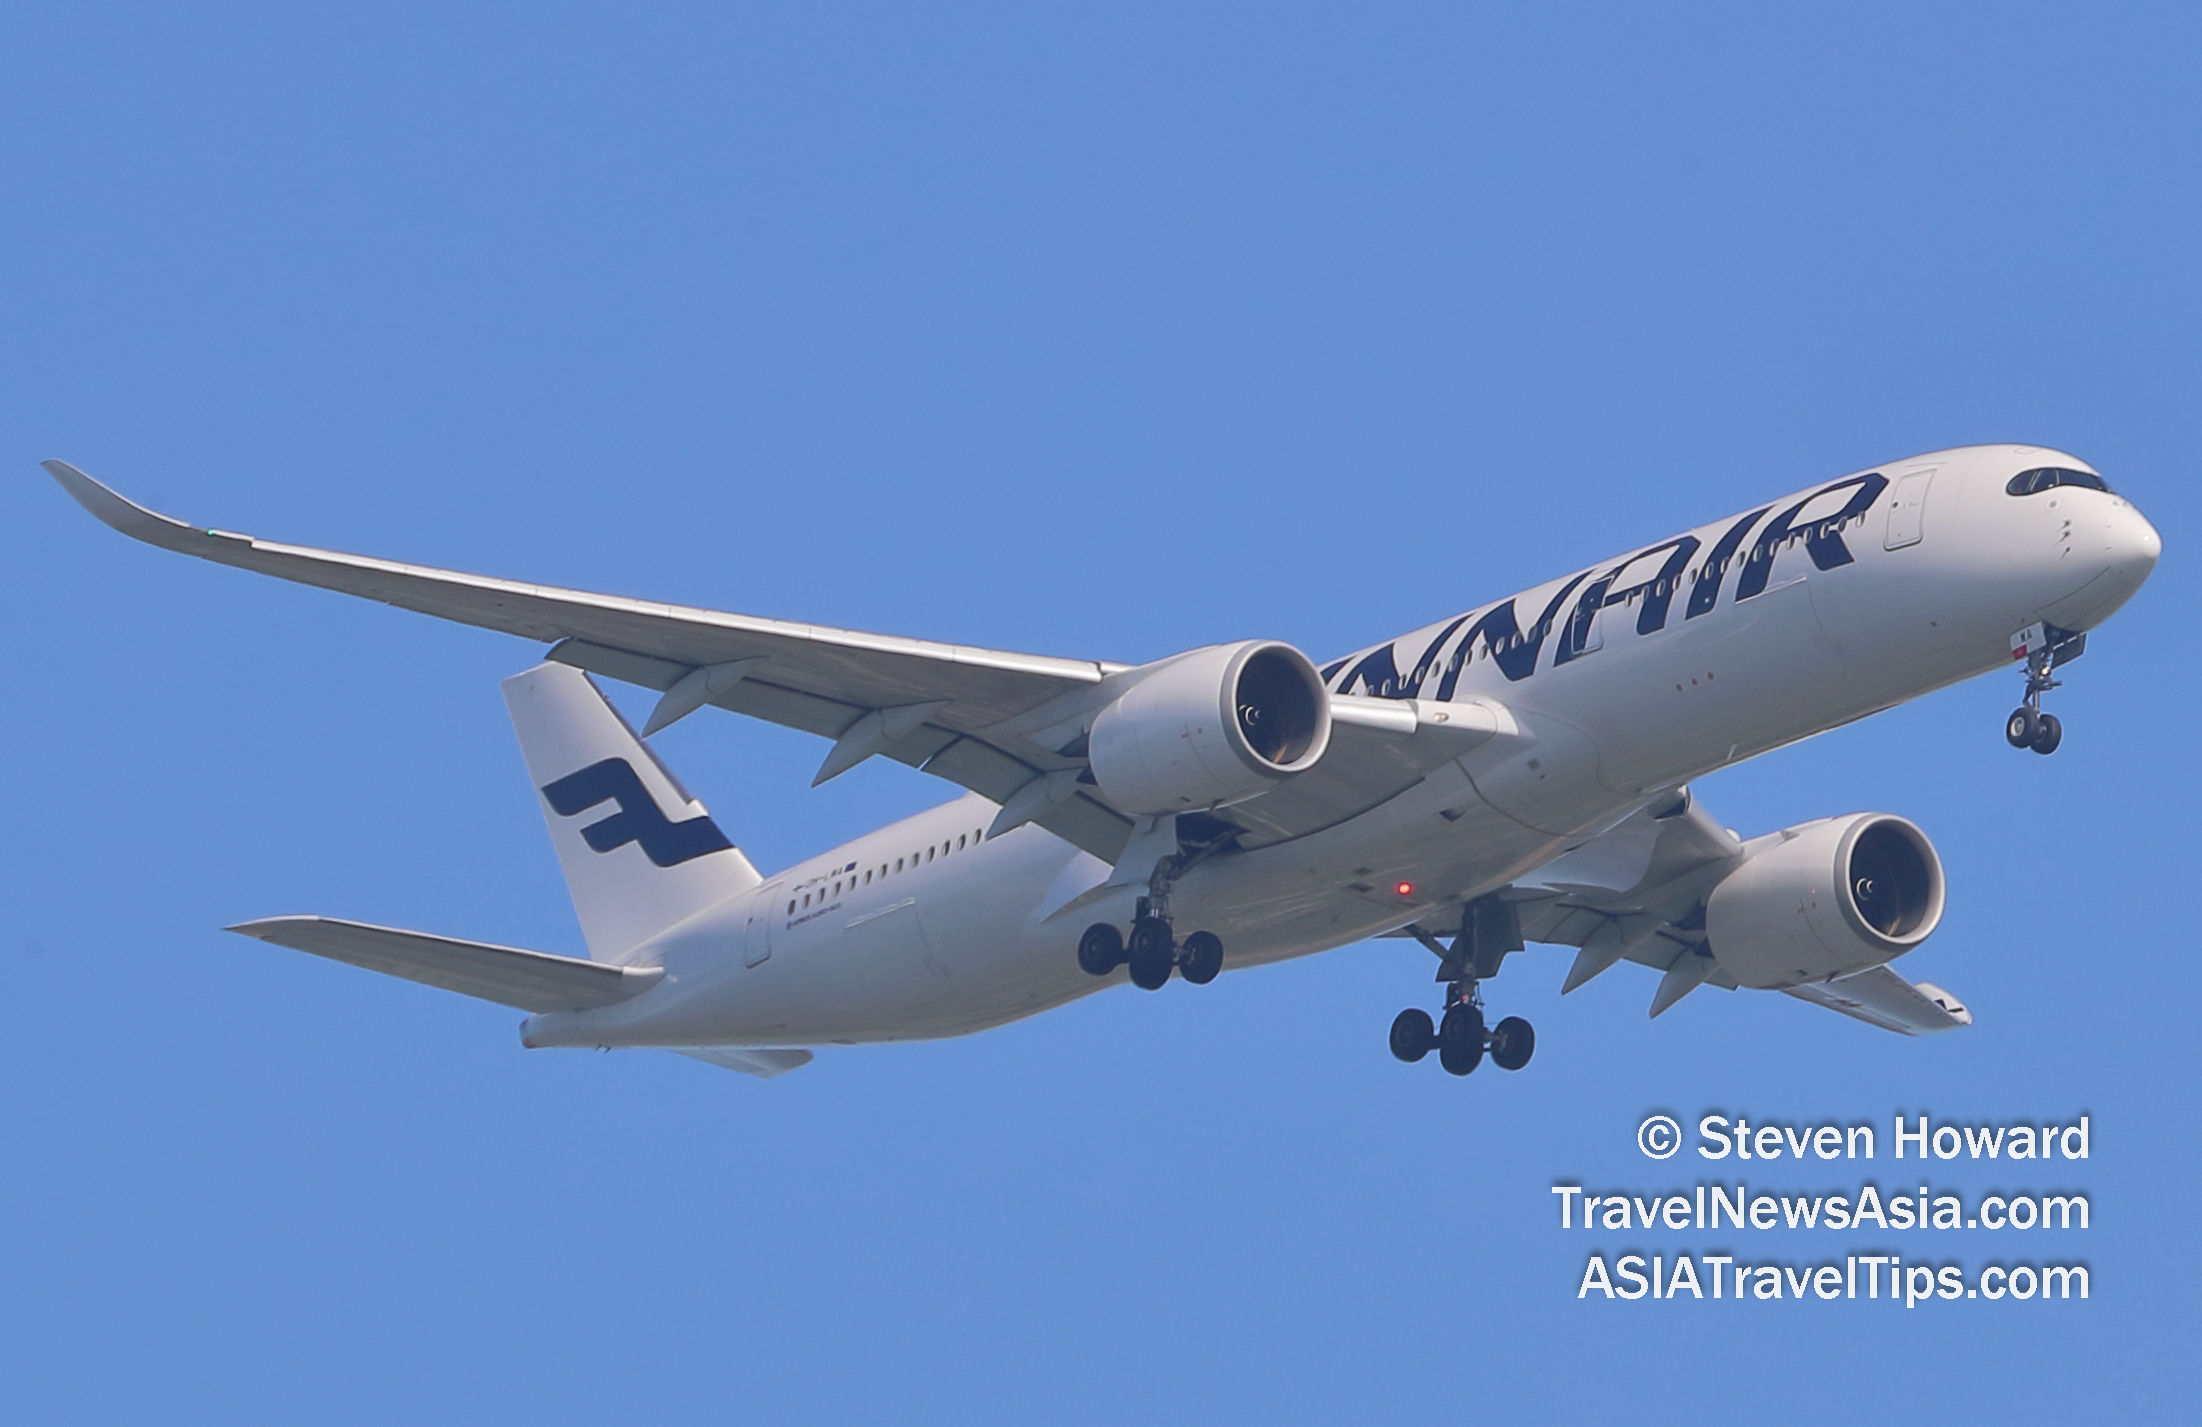 Finnair Airbus A350 reg: DH-LWA. Picture by Steven Howard of TravelNewsAsia.com. Click to enlarge.